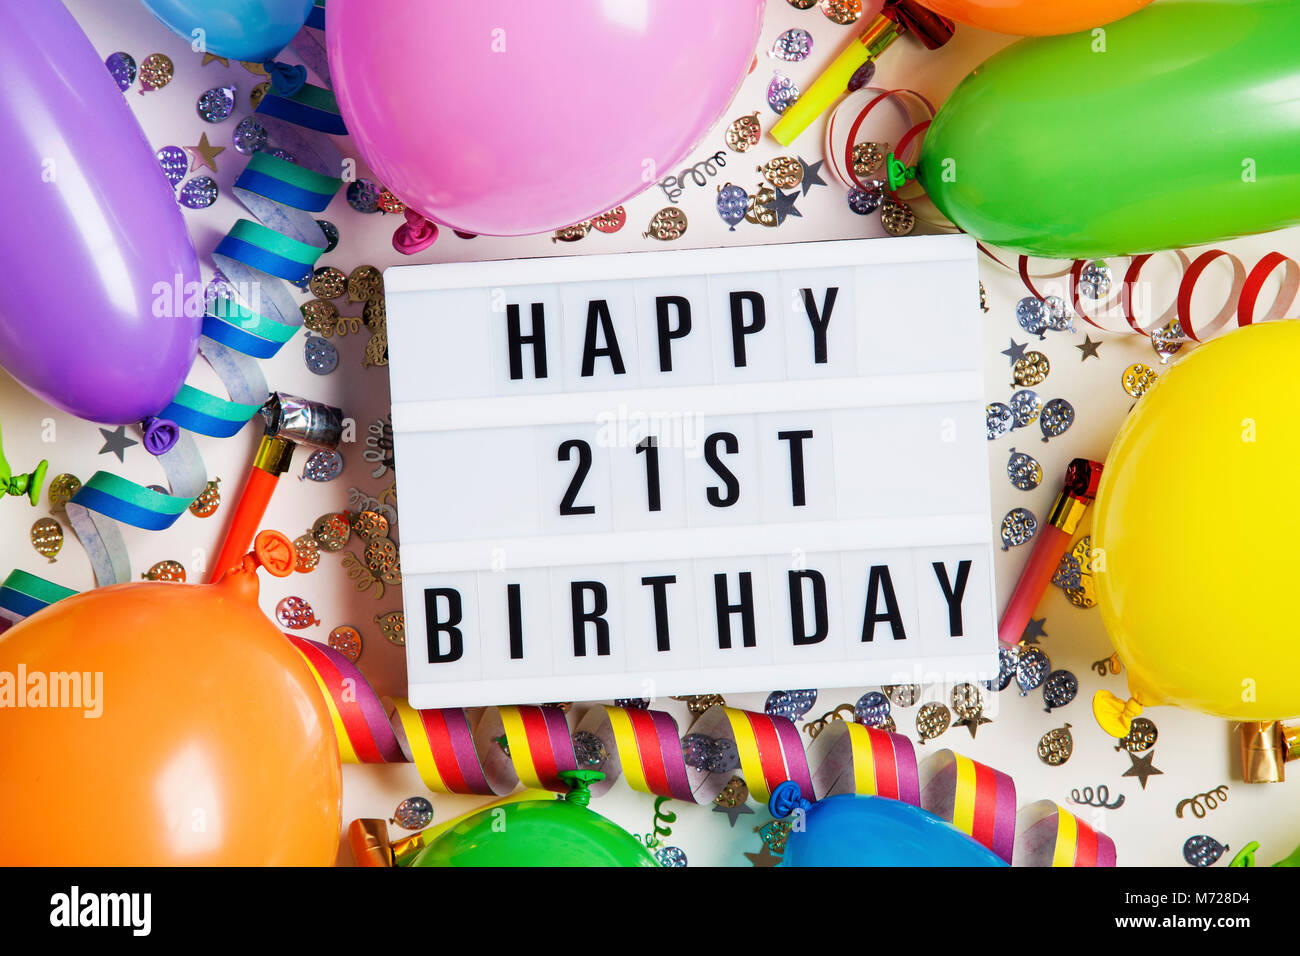 Happy 21st birthday celebration message on a lightbox with balloons and confetti Stock Photo